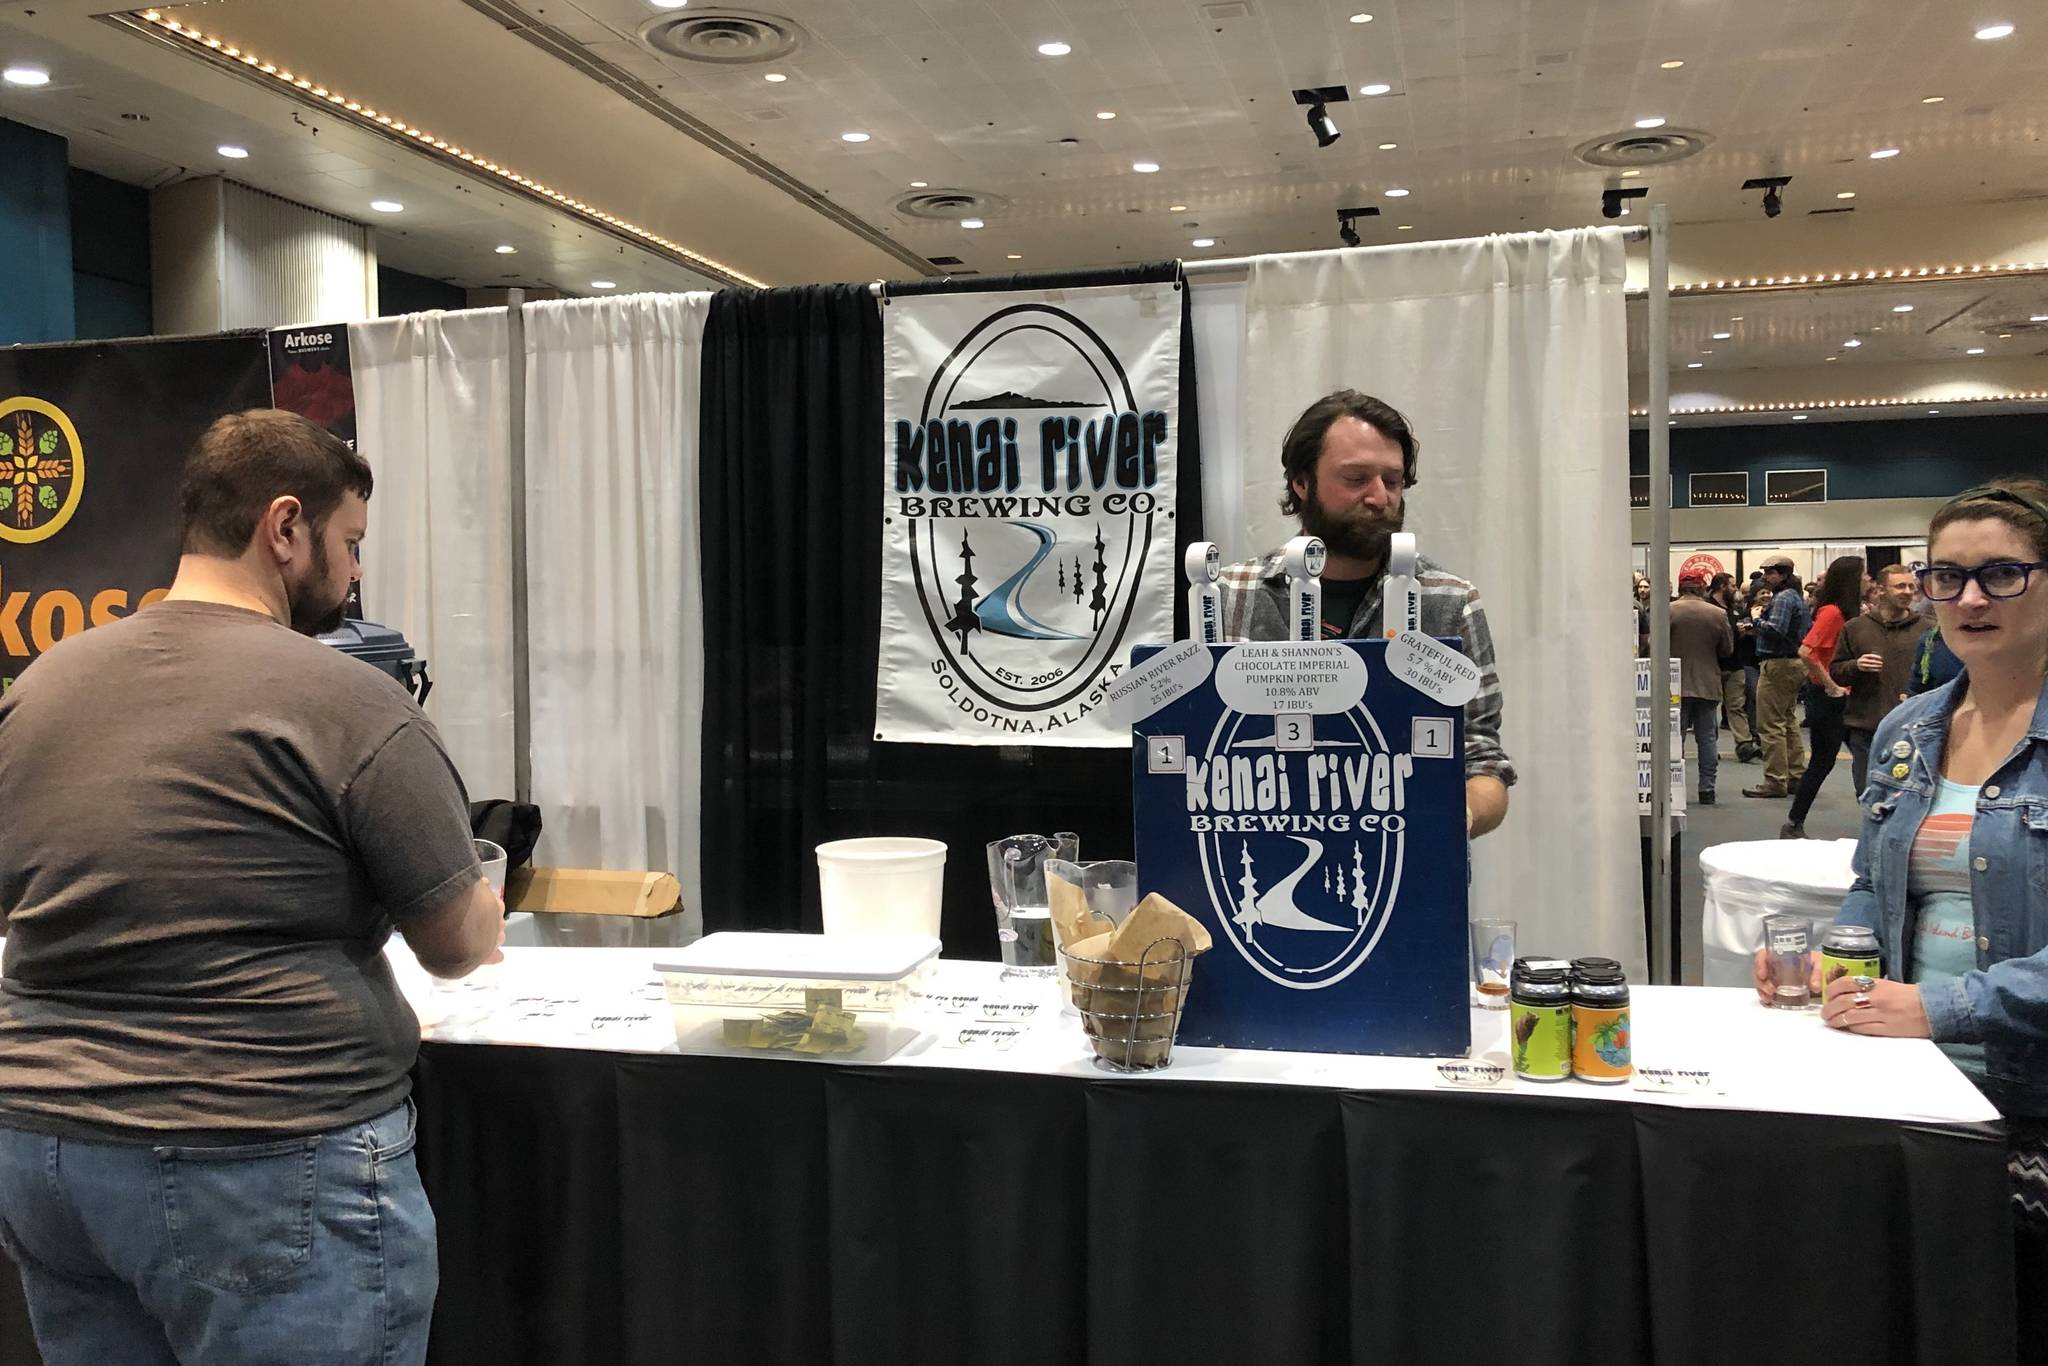 Local breweries, including St. Elias, Kassiks, Kenai river Brewing, participate in the 25th annual Great Alaska Beer and Barelywine festival in Anchorage, on Saturday. (Photo by Victoria Petersen/Peninsula Clarion)